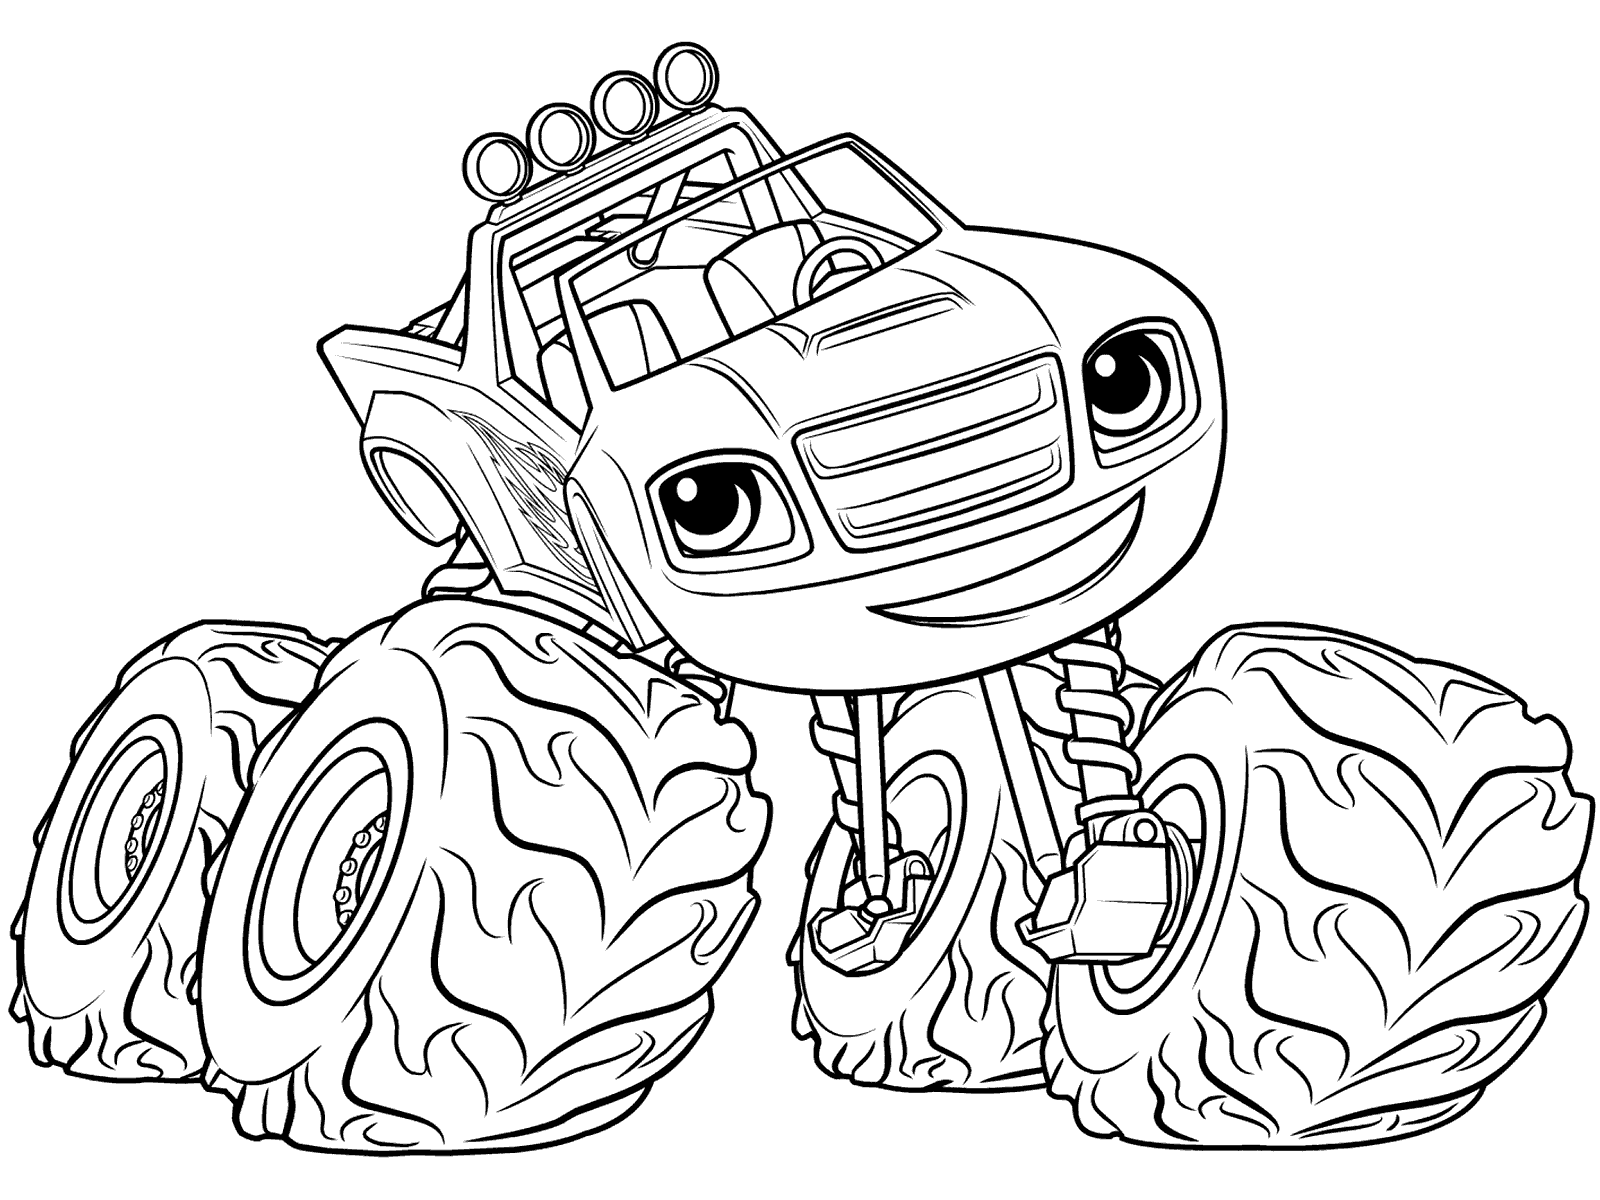 Blaze And The Monster Machines Coloring Pages To Print at GetDrawings